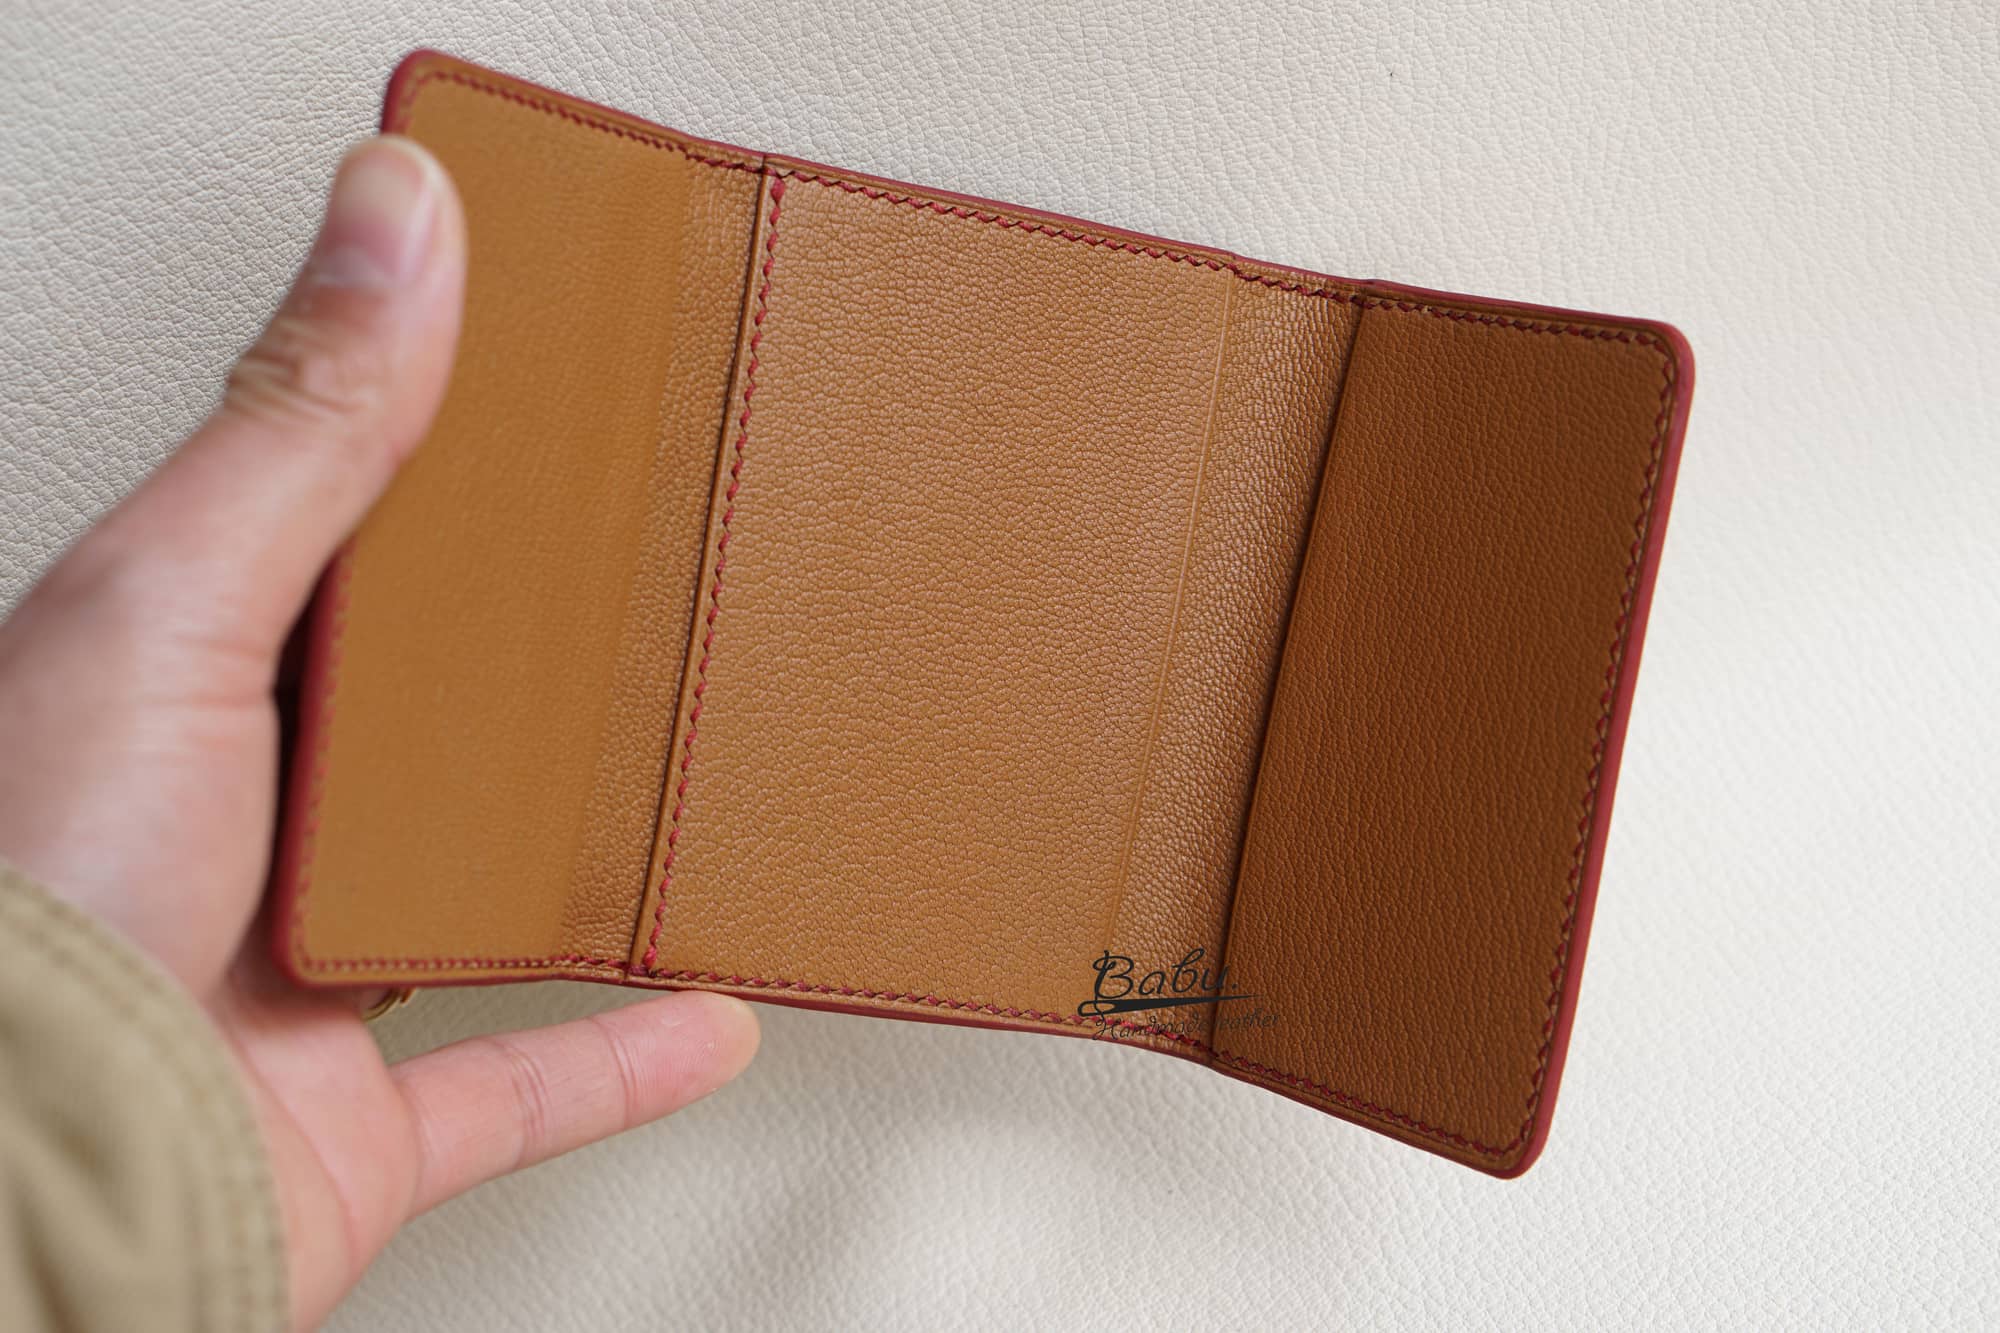 Alran Sully Goat Leather Credit card wallet, Handmade Leather